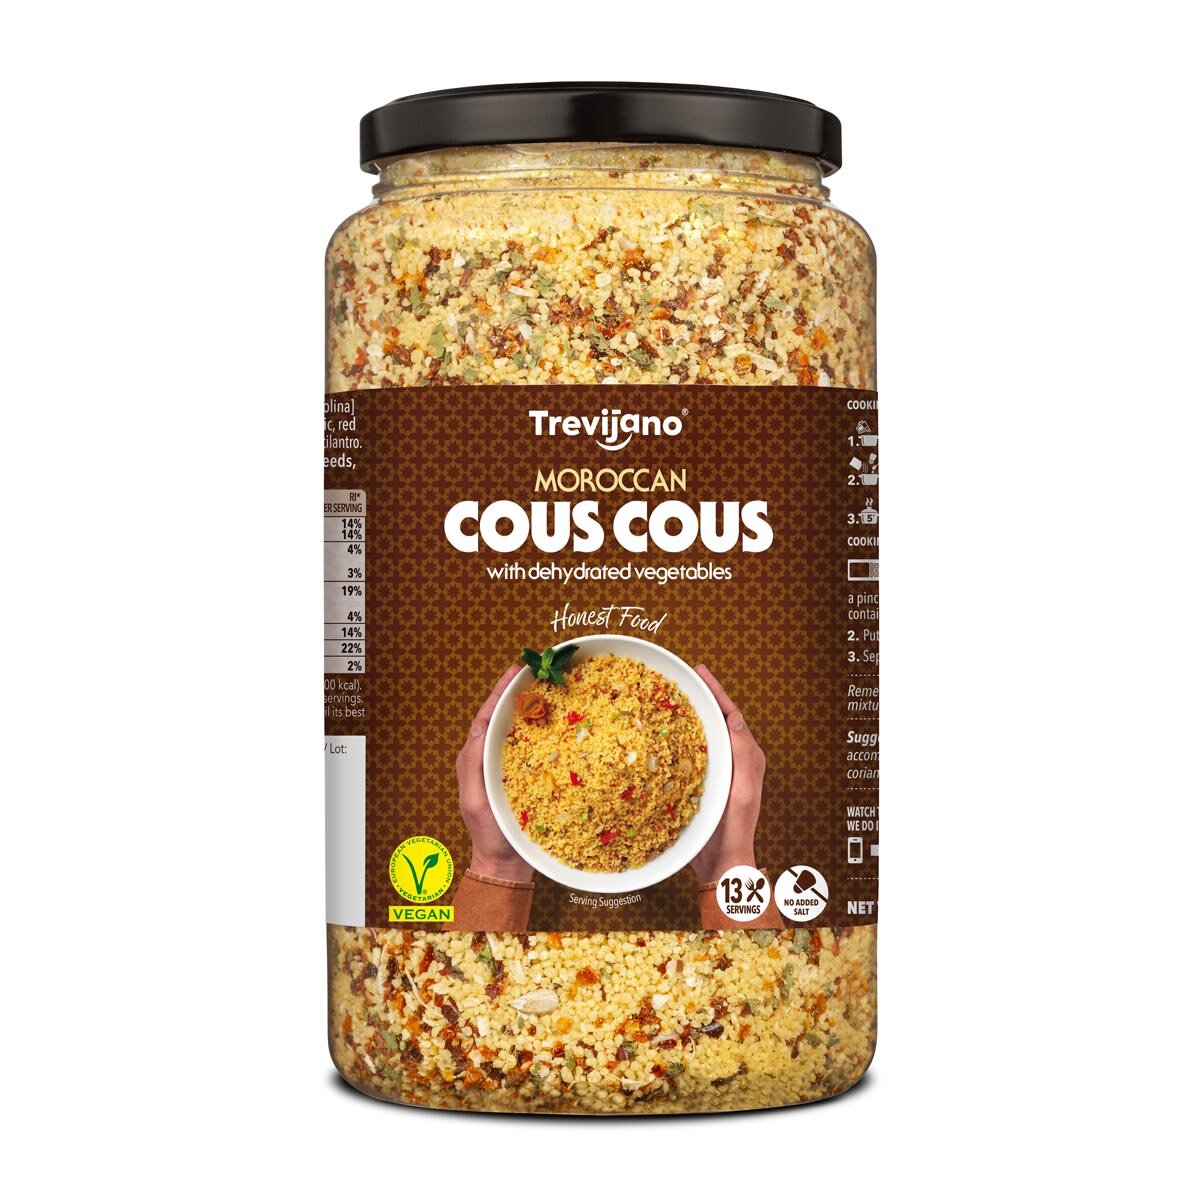 Trevijano Moroccan Couscous with Vegetables 1kg